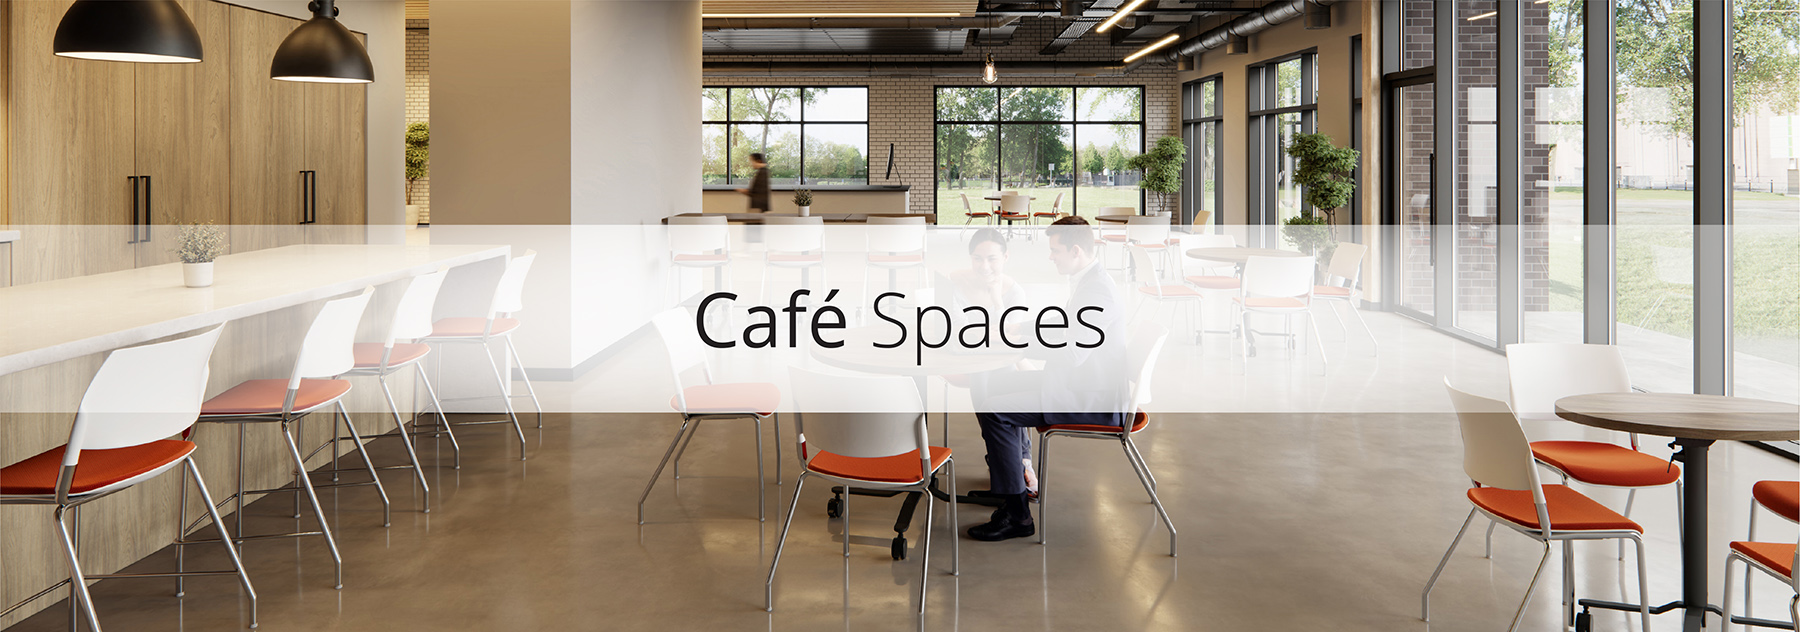 Cafe-spaces